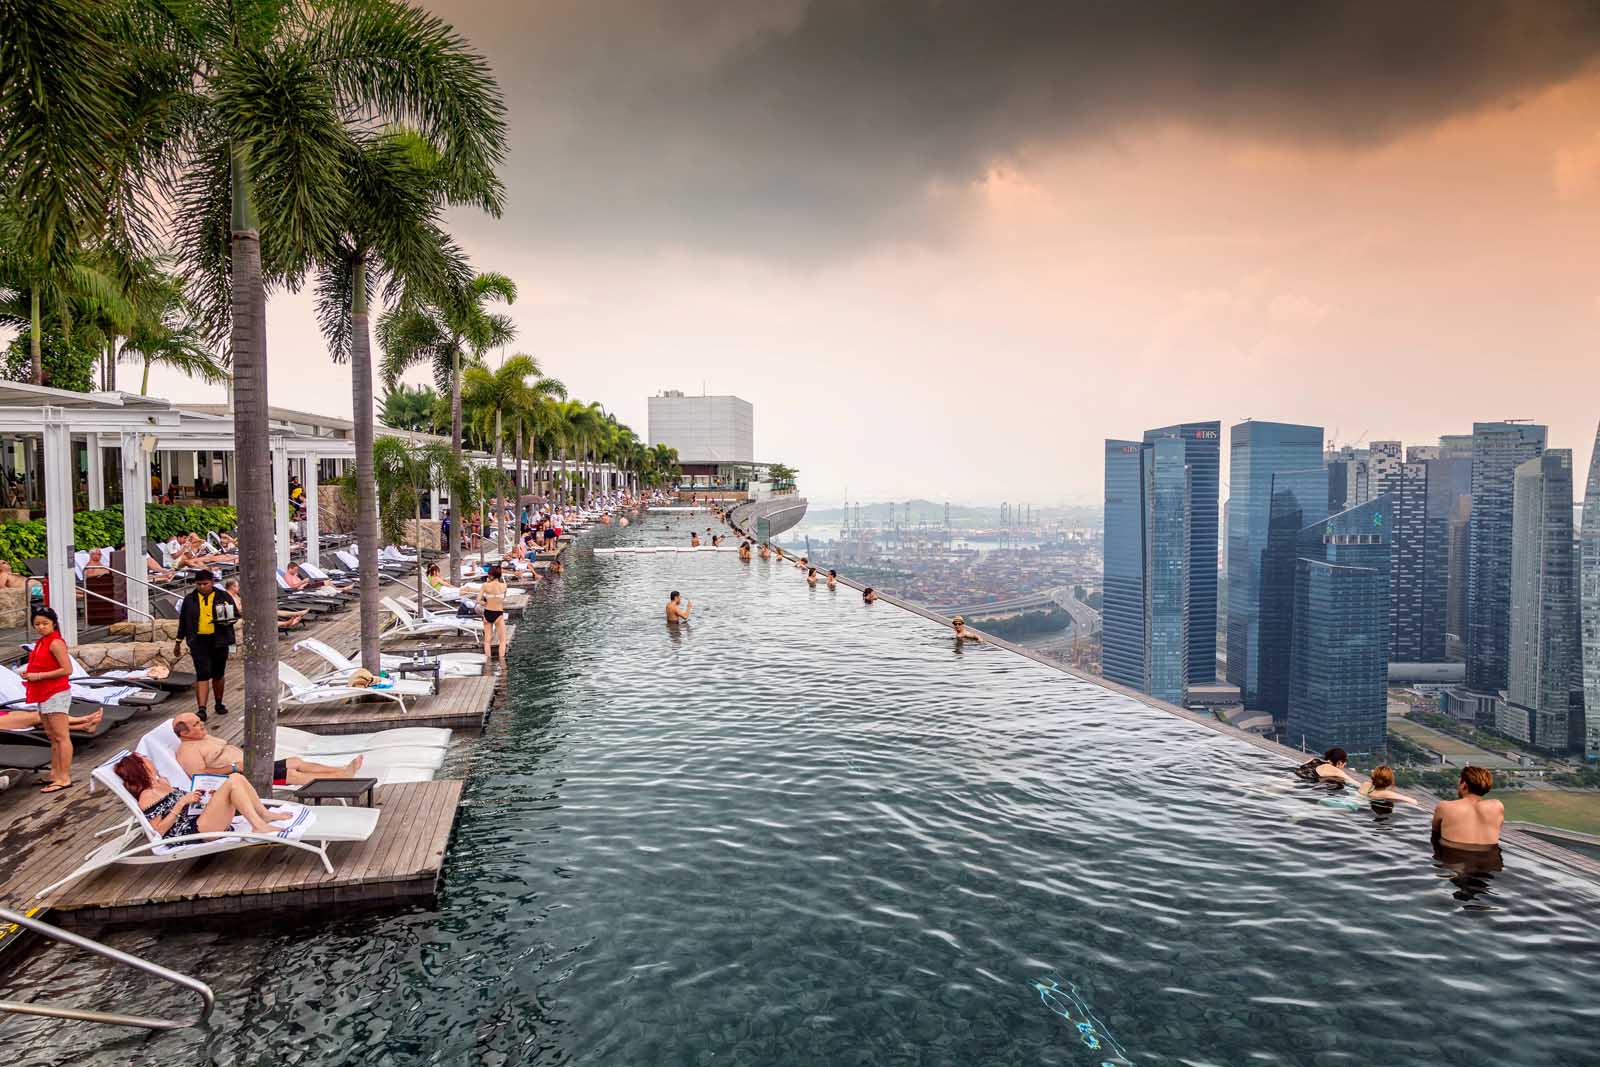 A private pool at the Marina Bay Sands Hotel in singapore